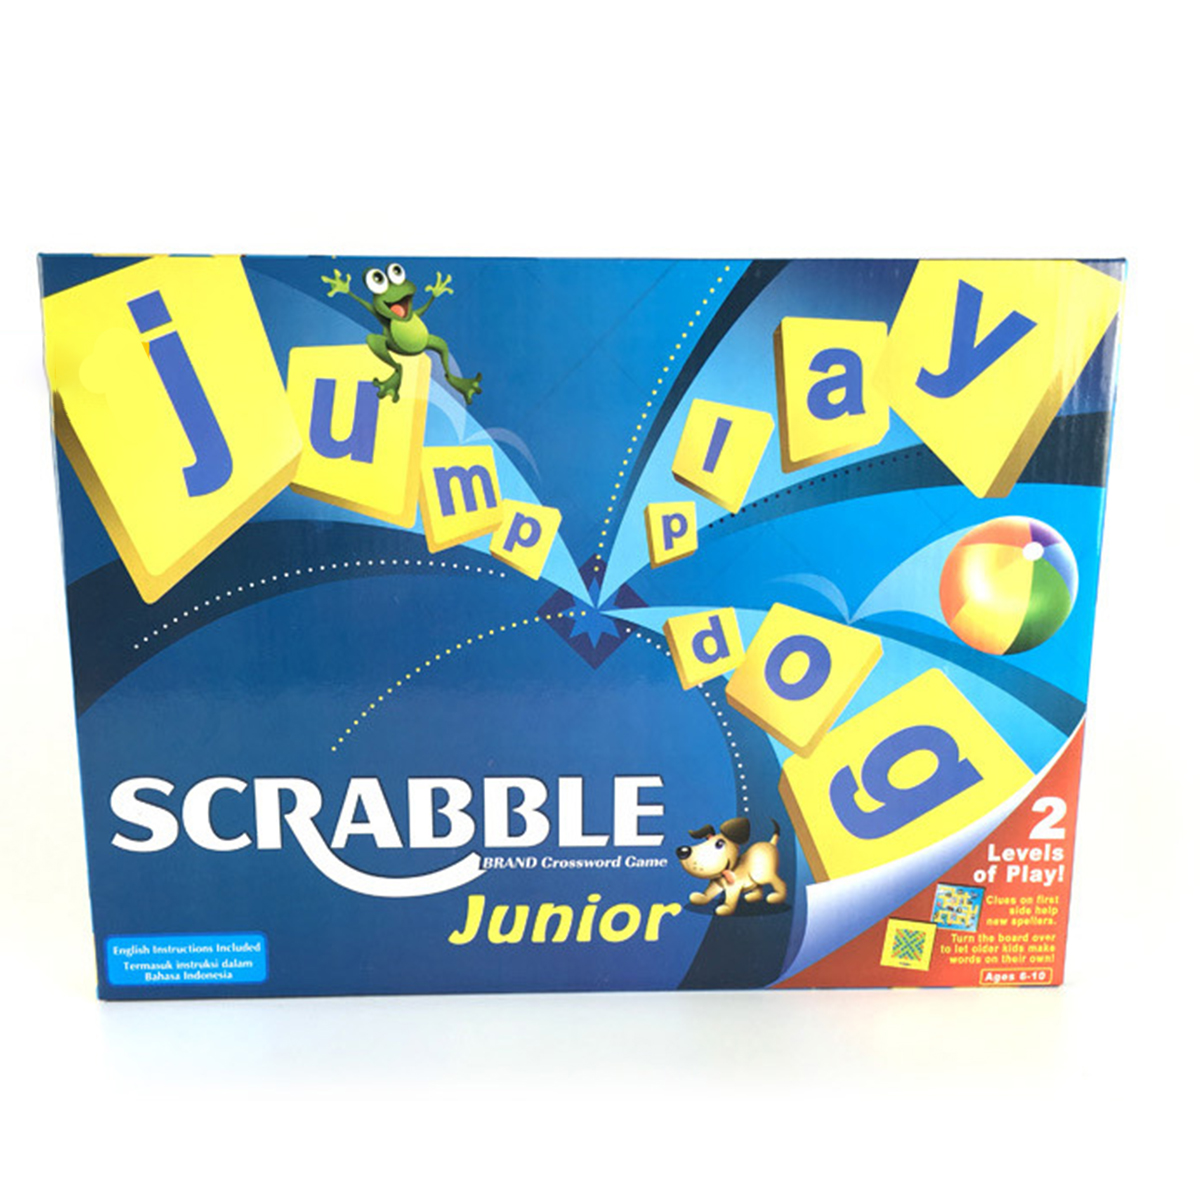 Letter-Crossword-Junior-Board-Game-Funny-Gift-Family-Multiplayer-Interaction-Game-Educational-Toys-1659444-10